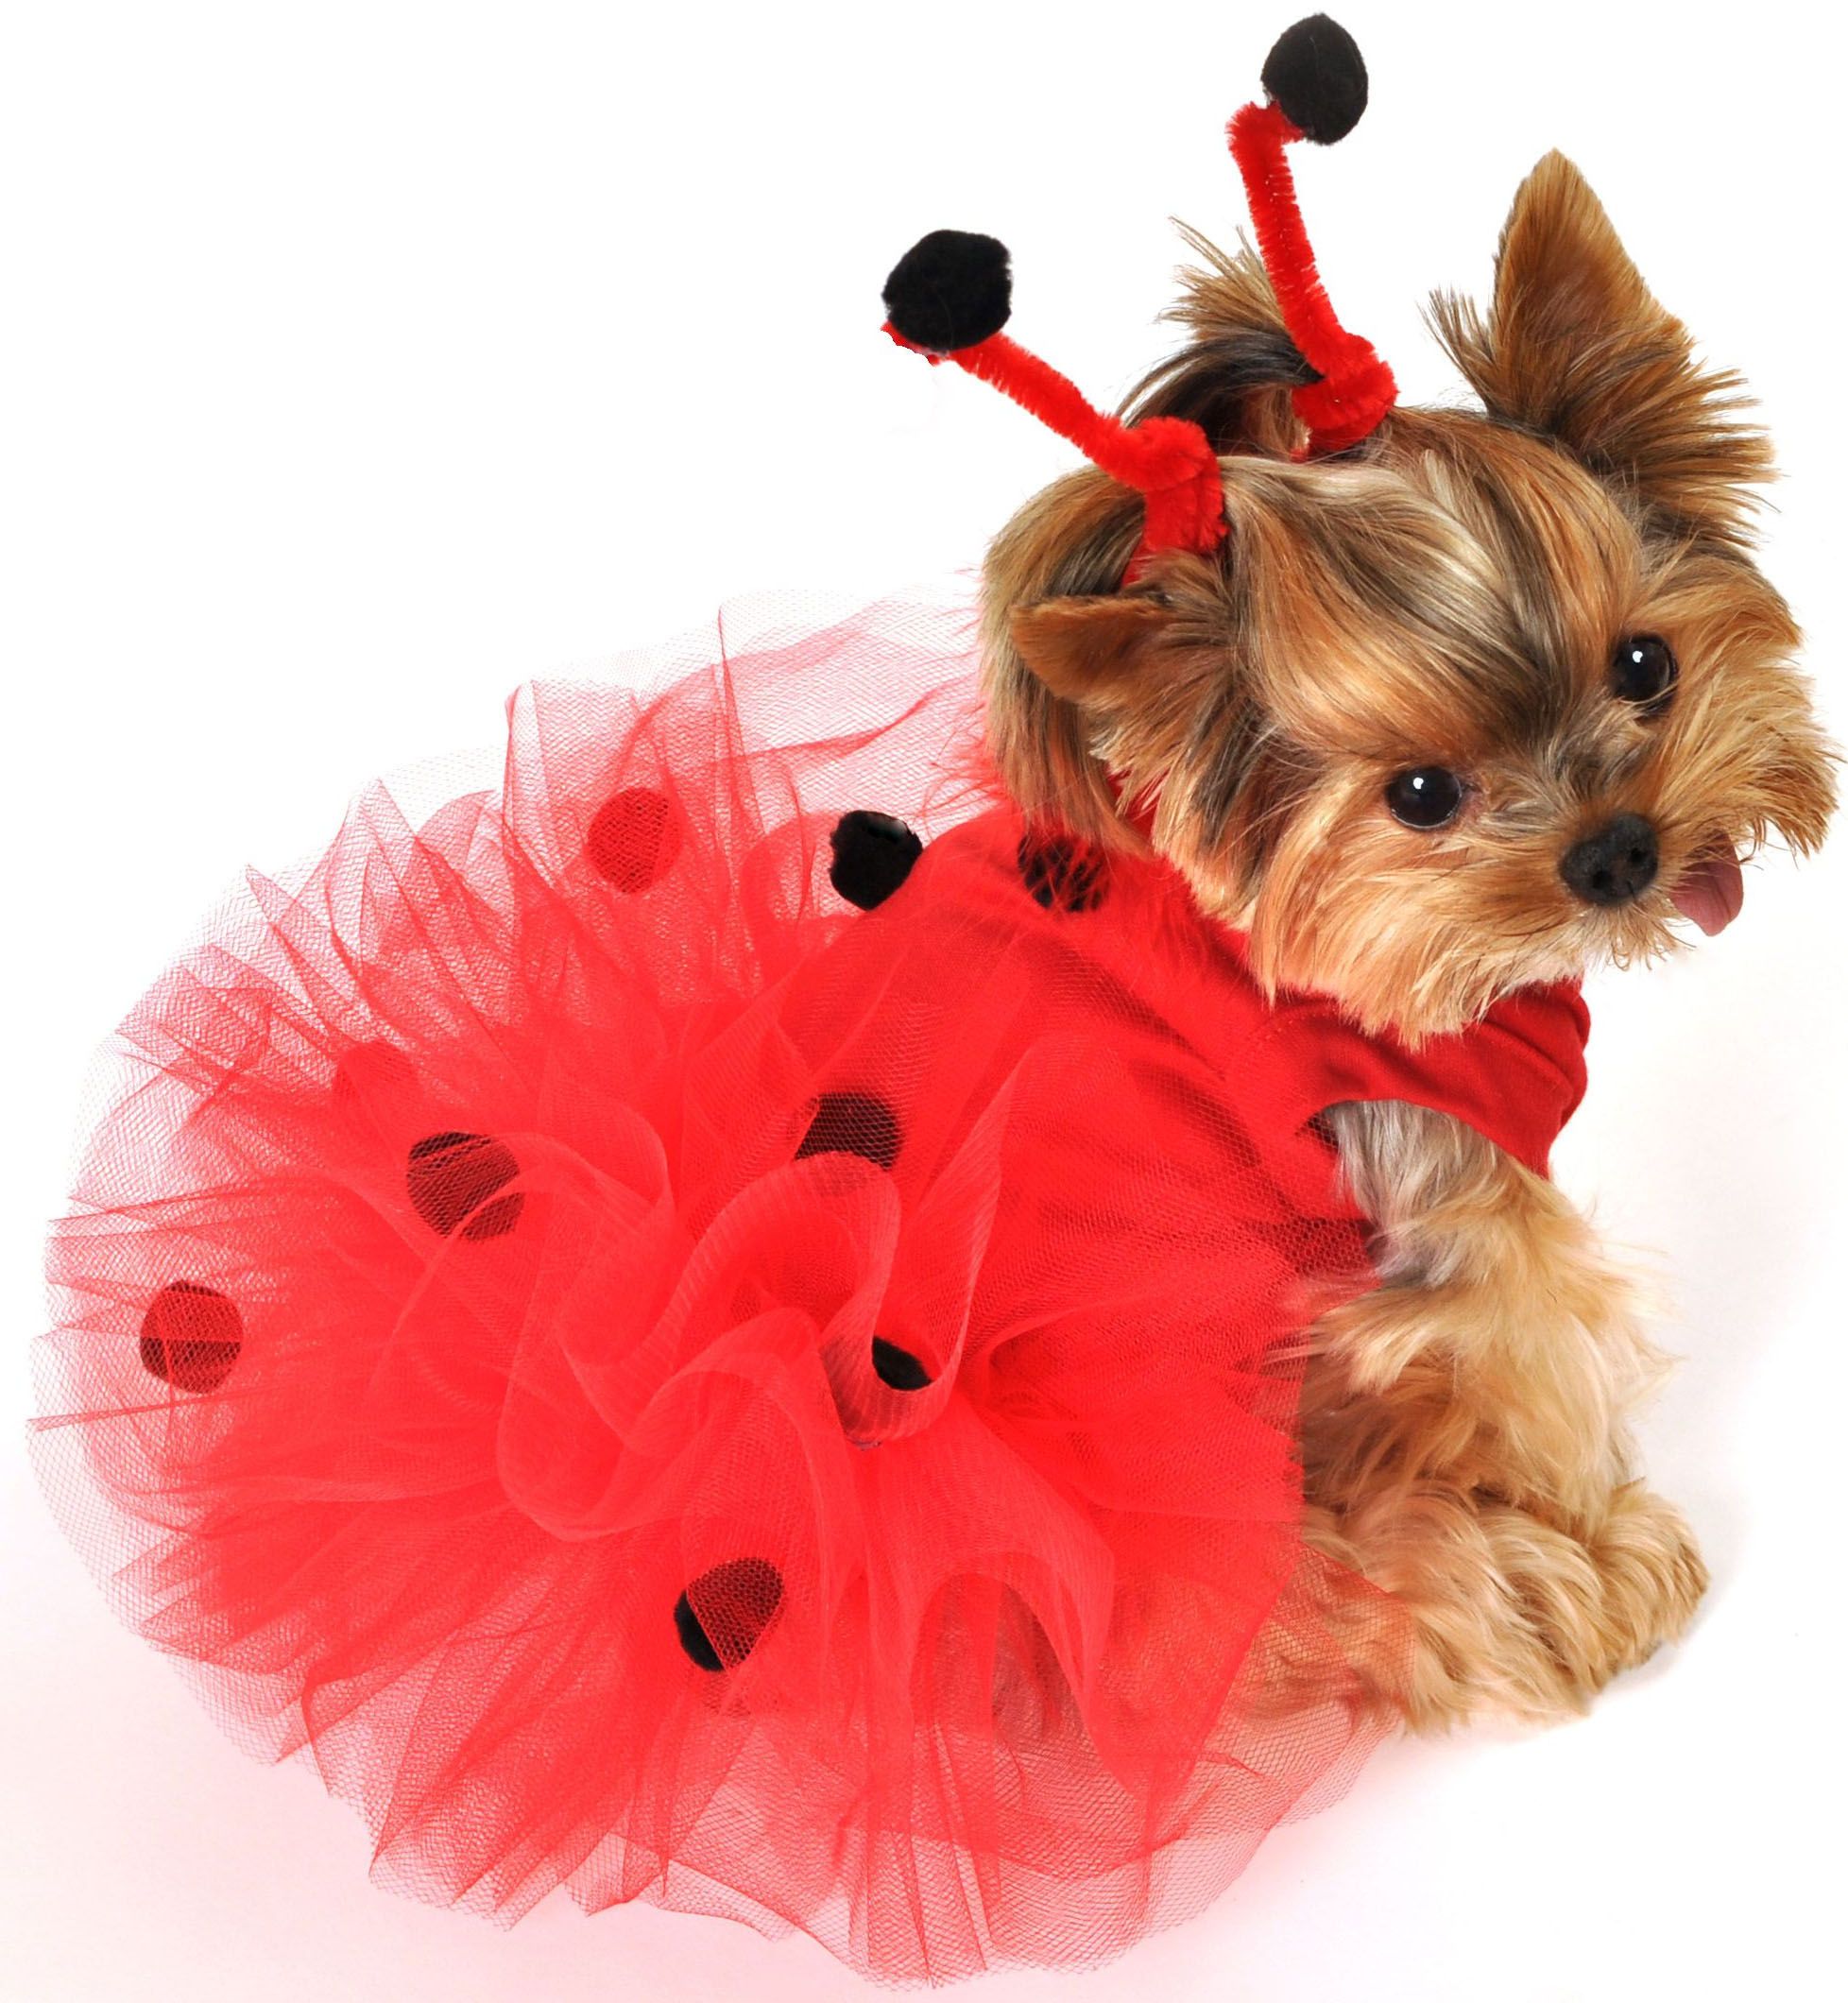 ENTER 2 WIN! Share Your Halloween Pet Picture. The Paw Print